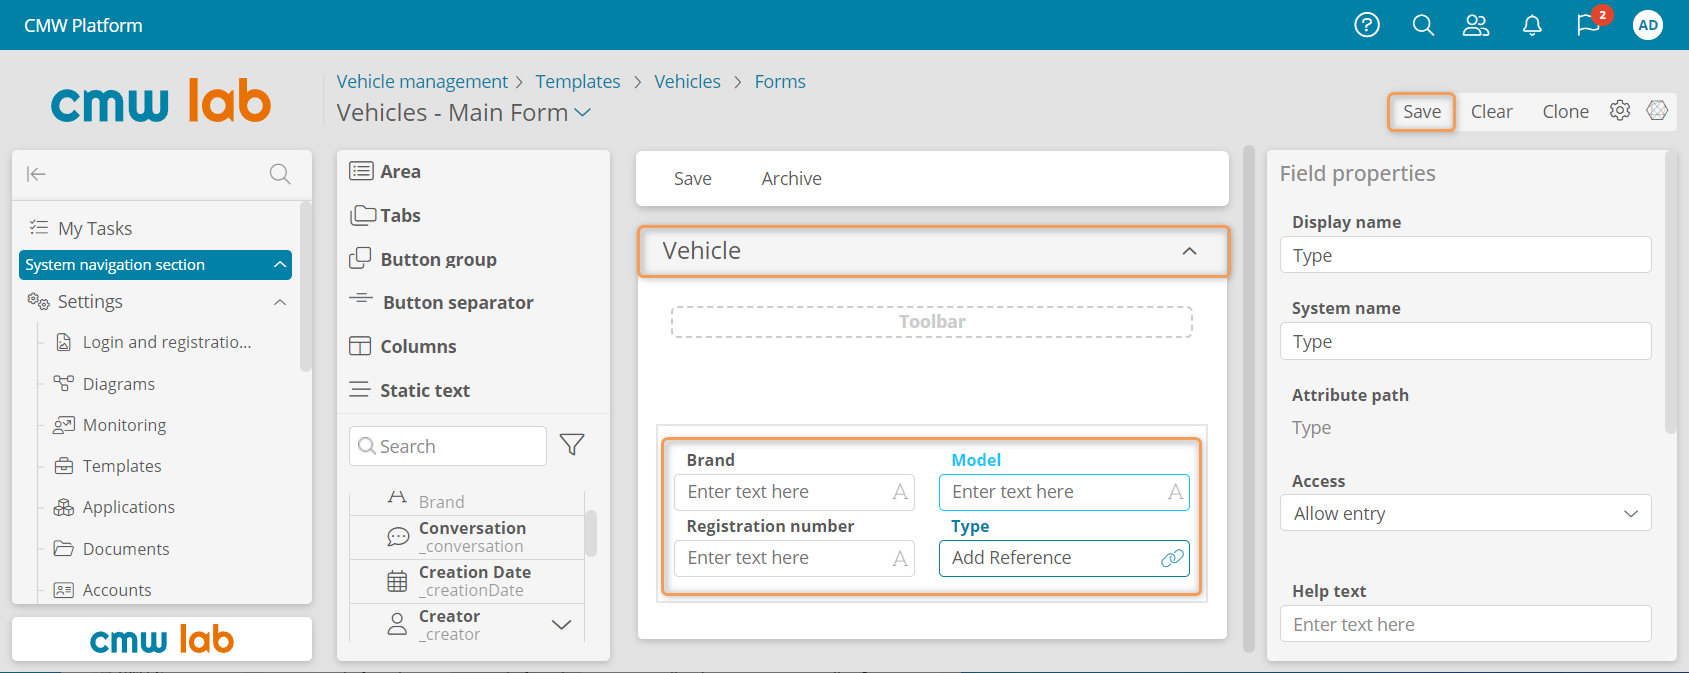 Setting up the form for the "Vehicles" record template